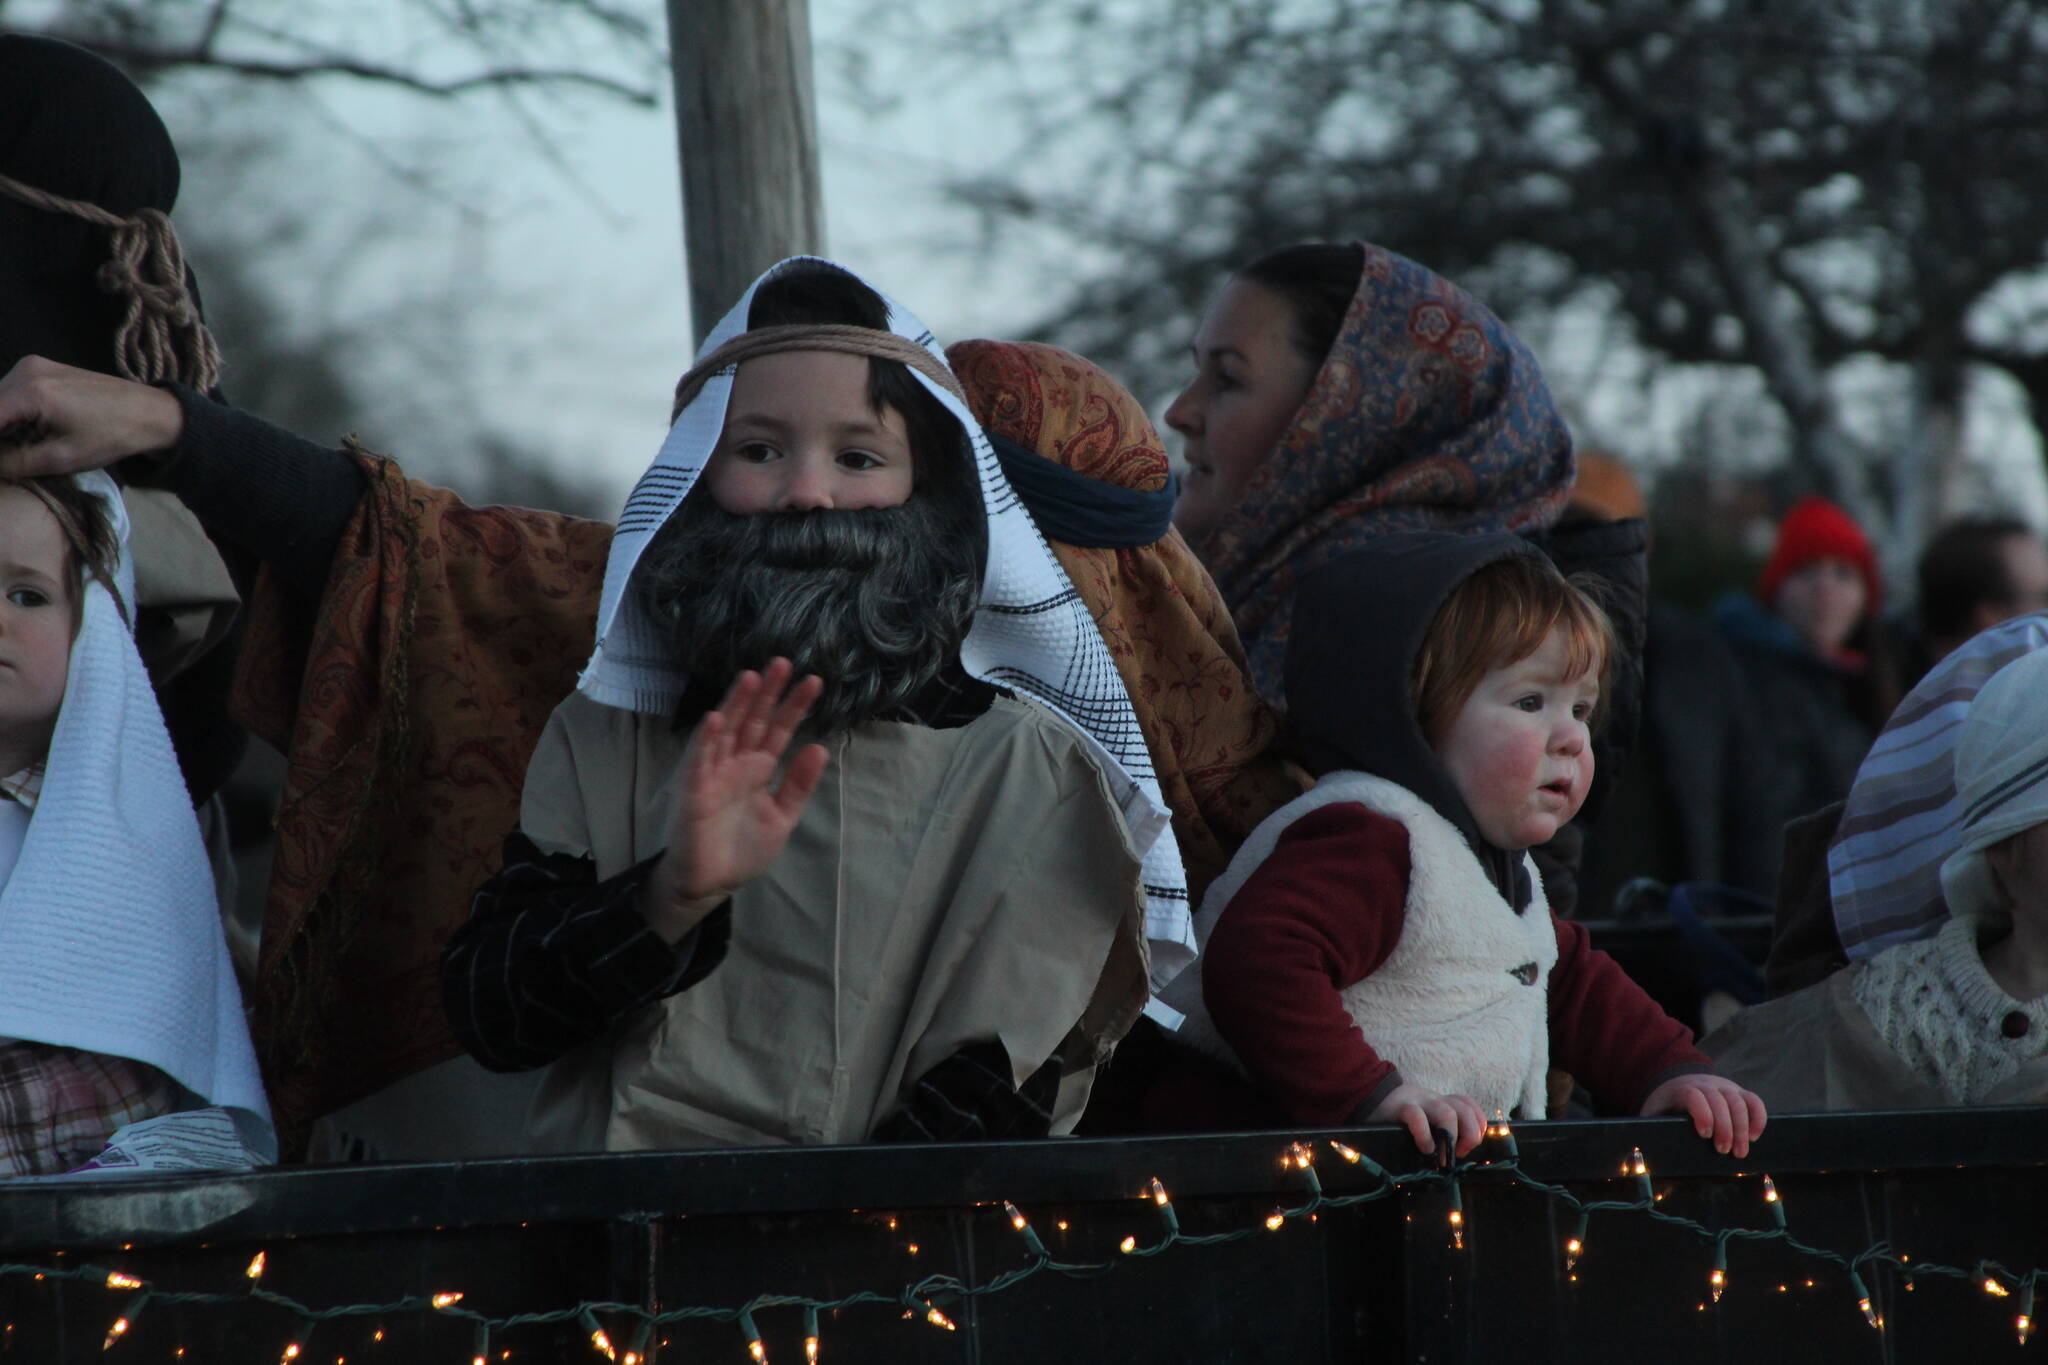 Photo by Karina Andrew/Whidbey News-Times
A pair of young shepherds ride in a parade nativity in Coupeville.